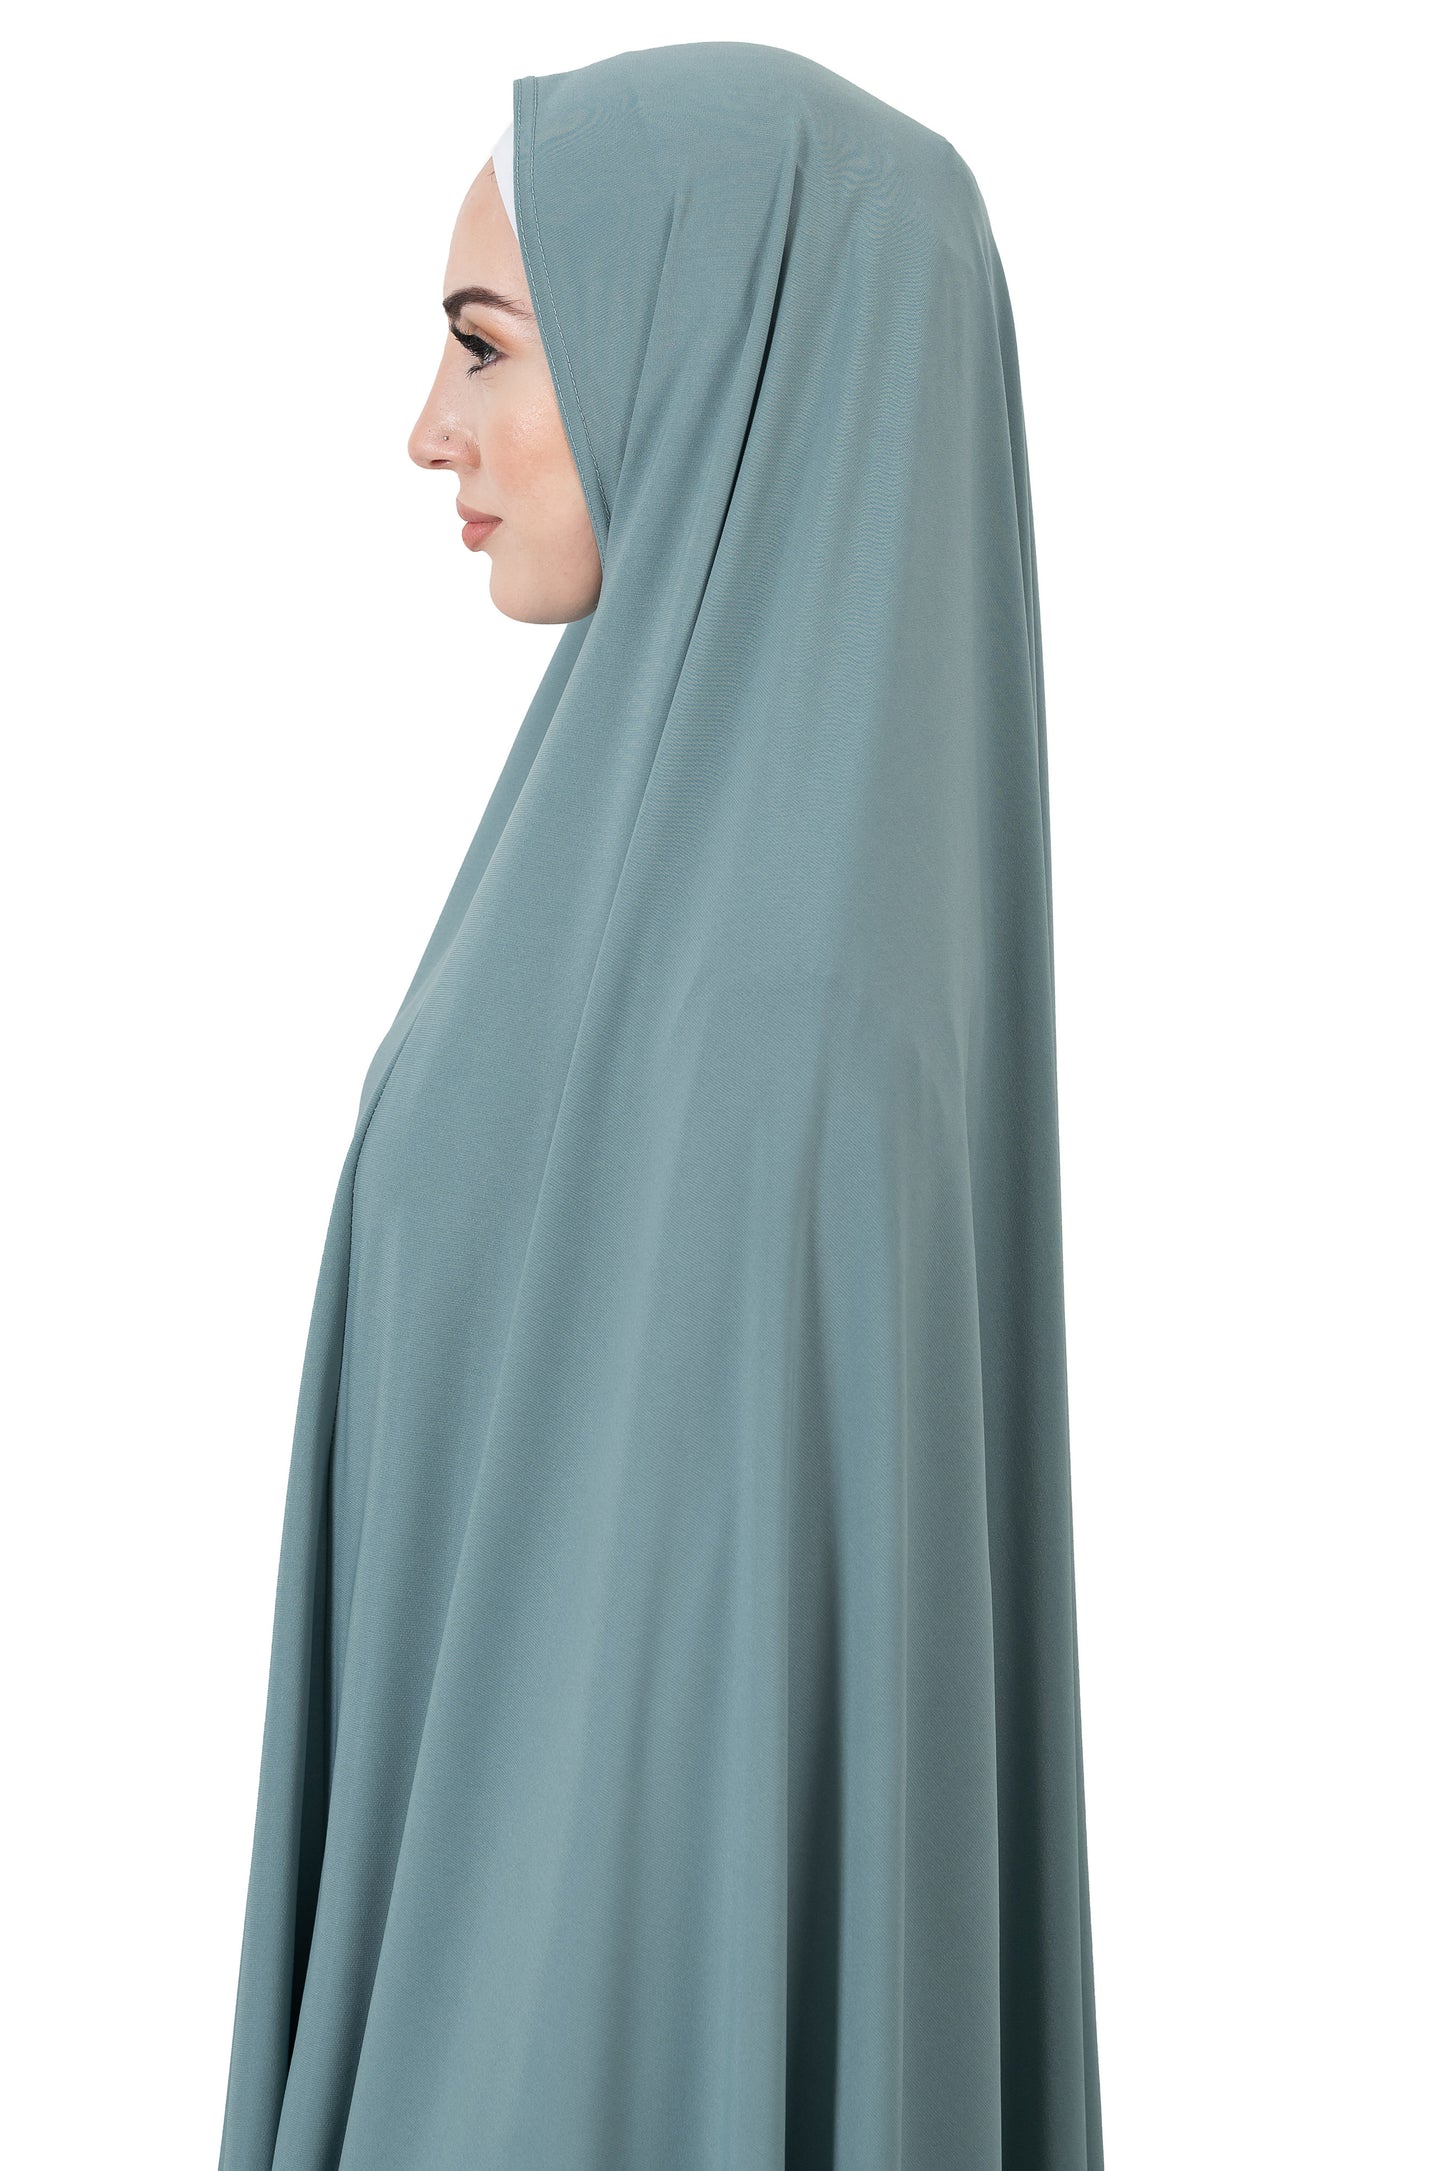 Standard Jersey Jelbab in Med Turquoise - Behind The Veil